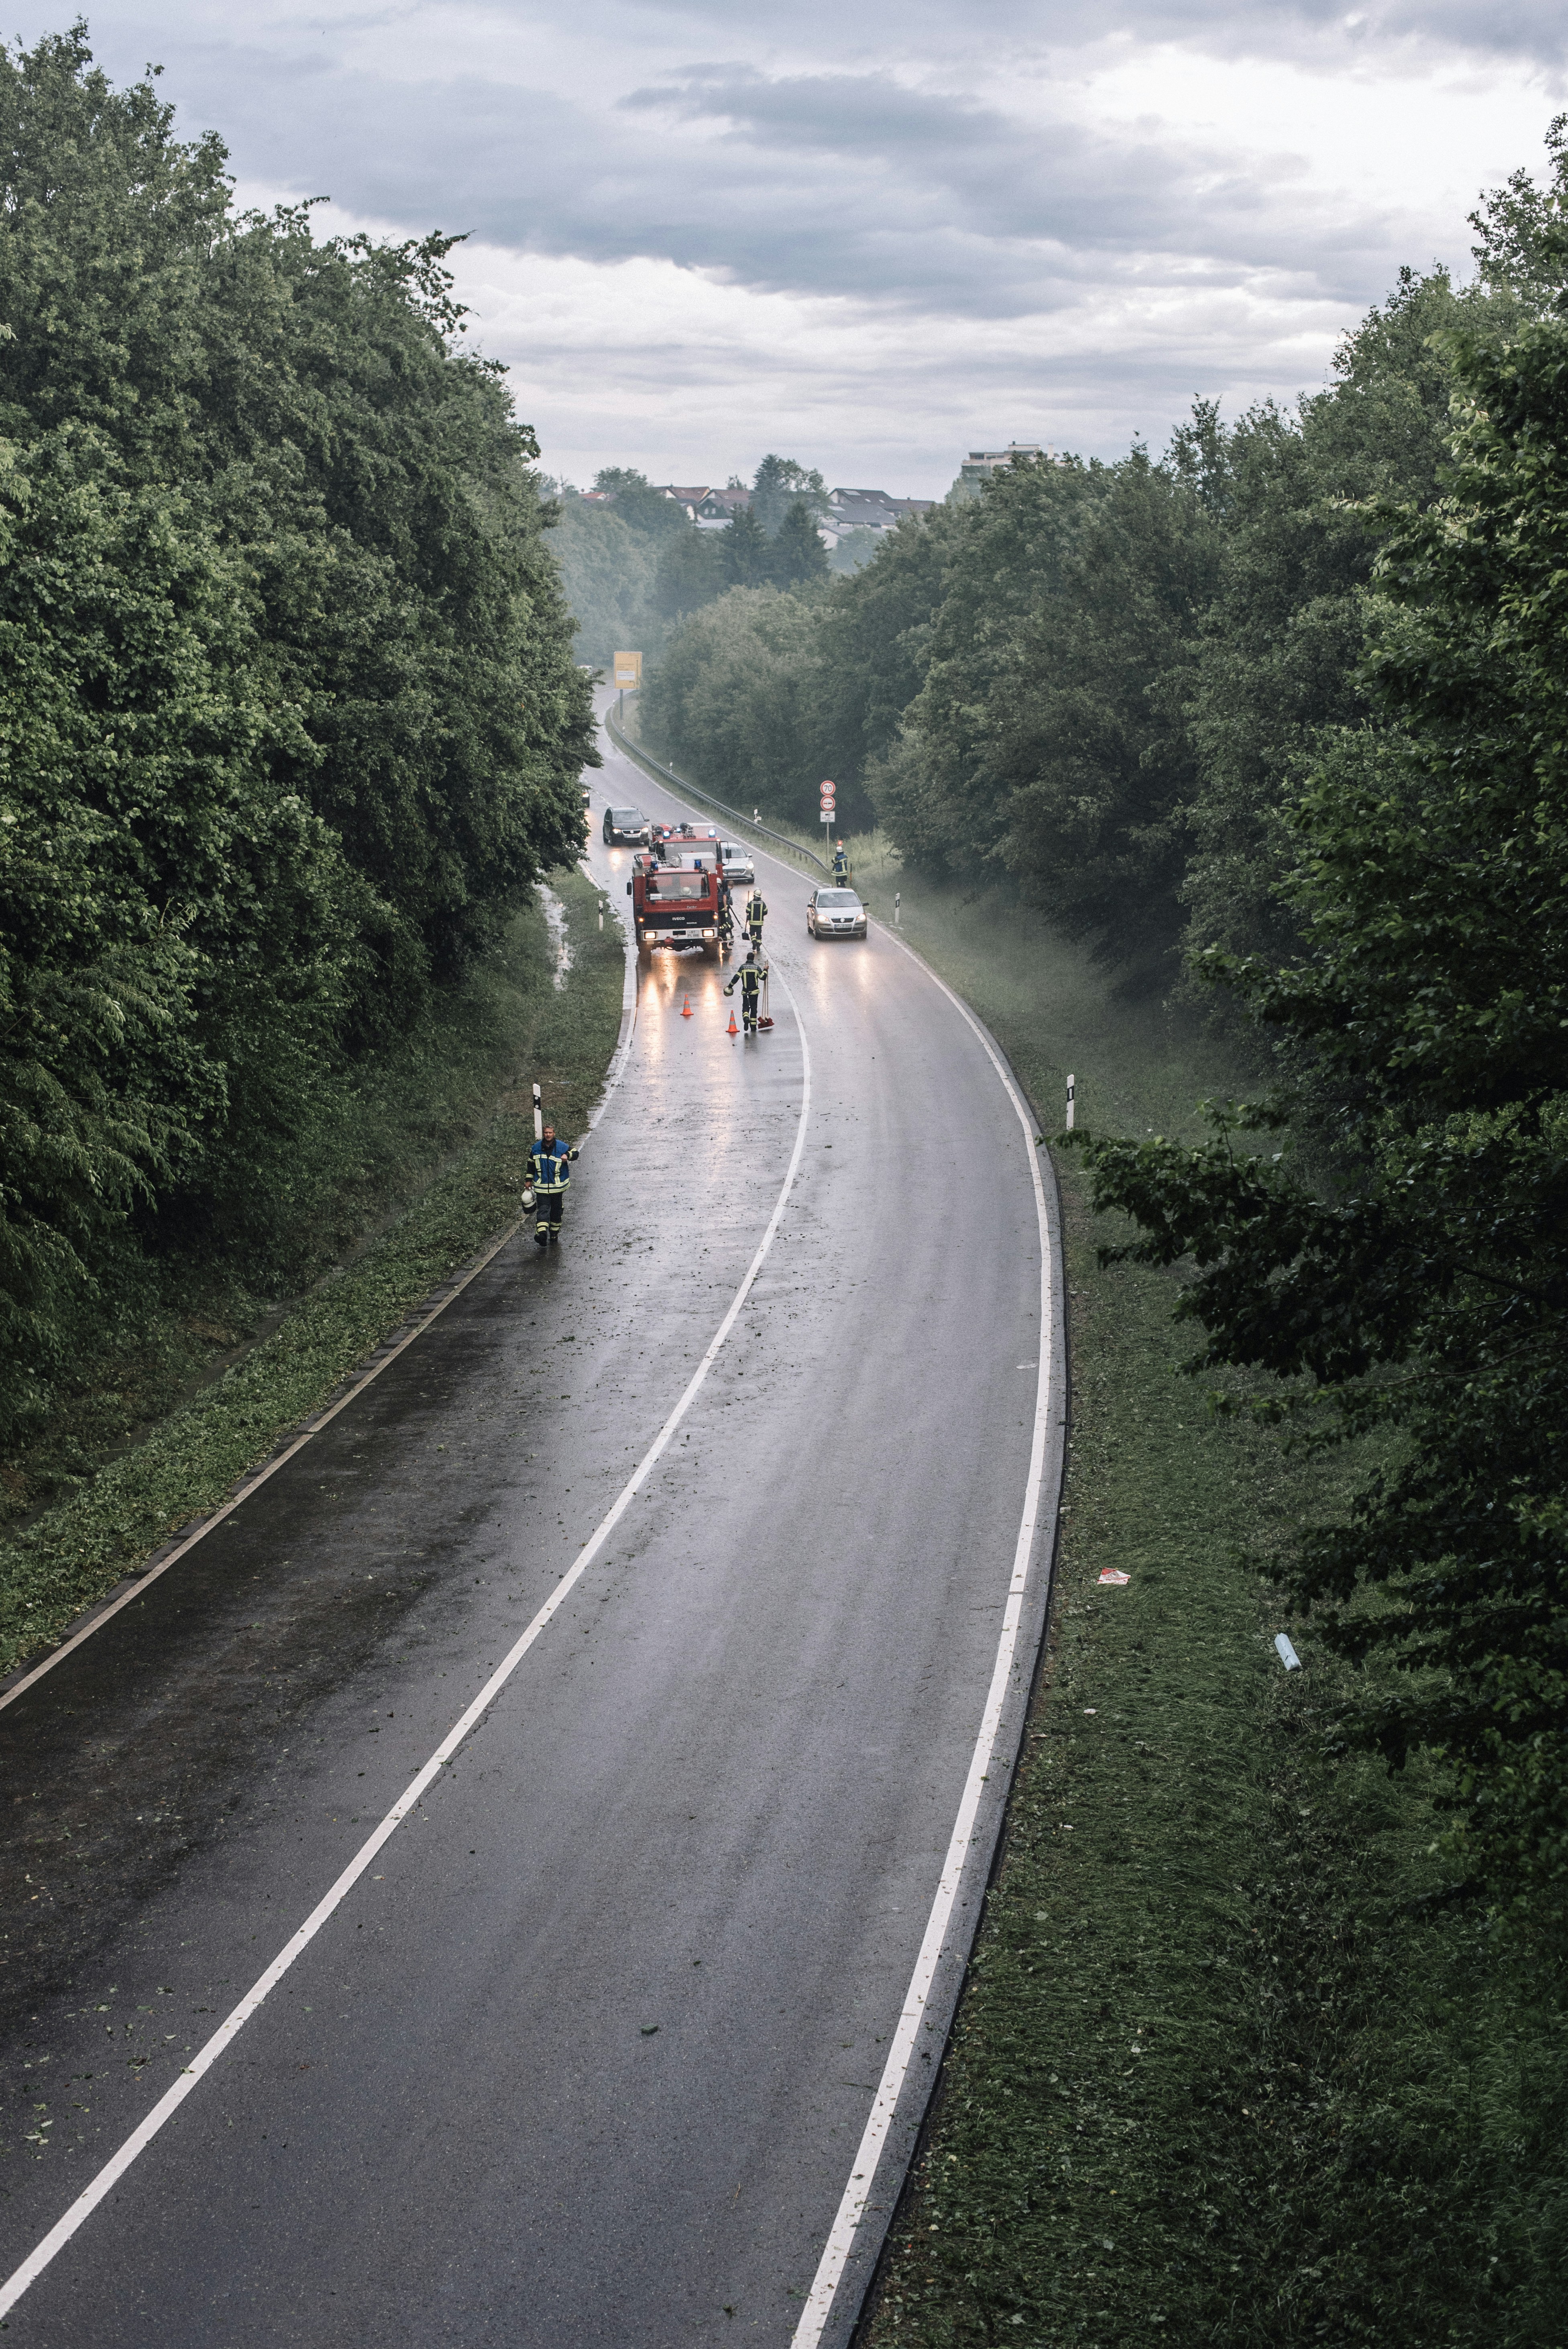 The road cleaning after a thunderstorm in Germany.